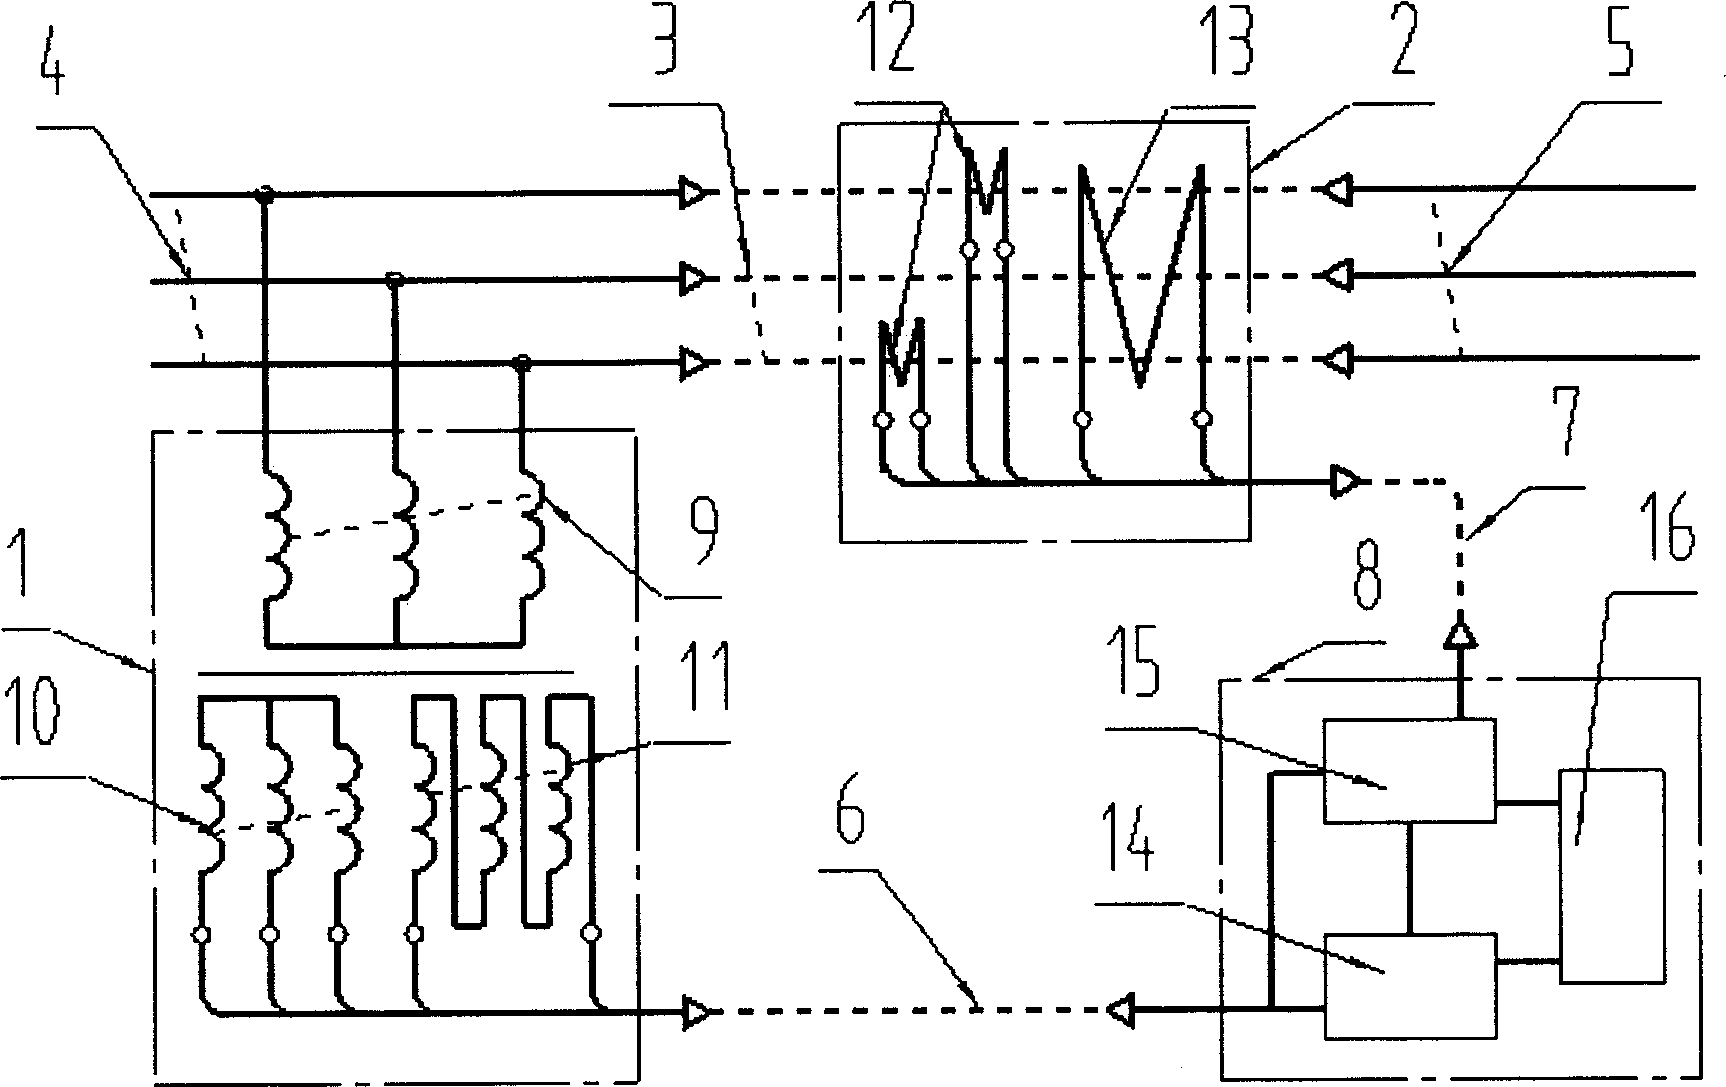 Electric line fault location device